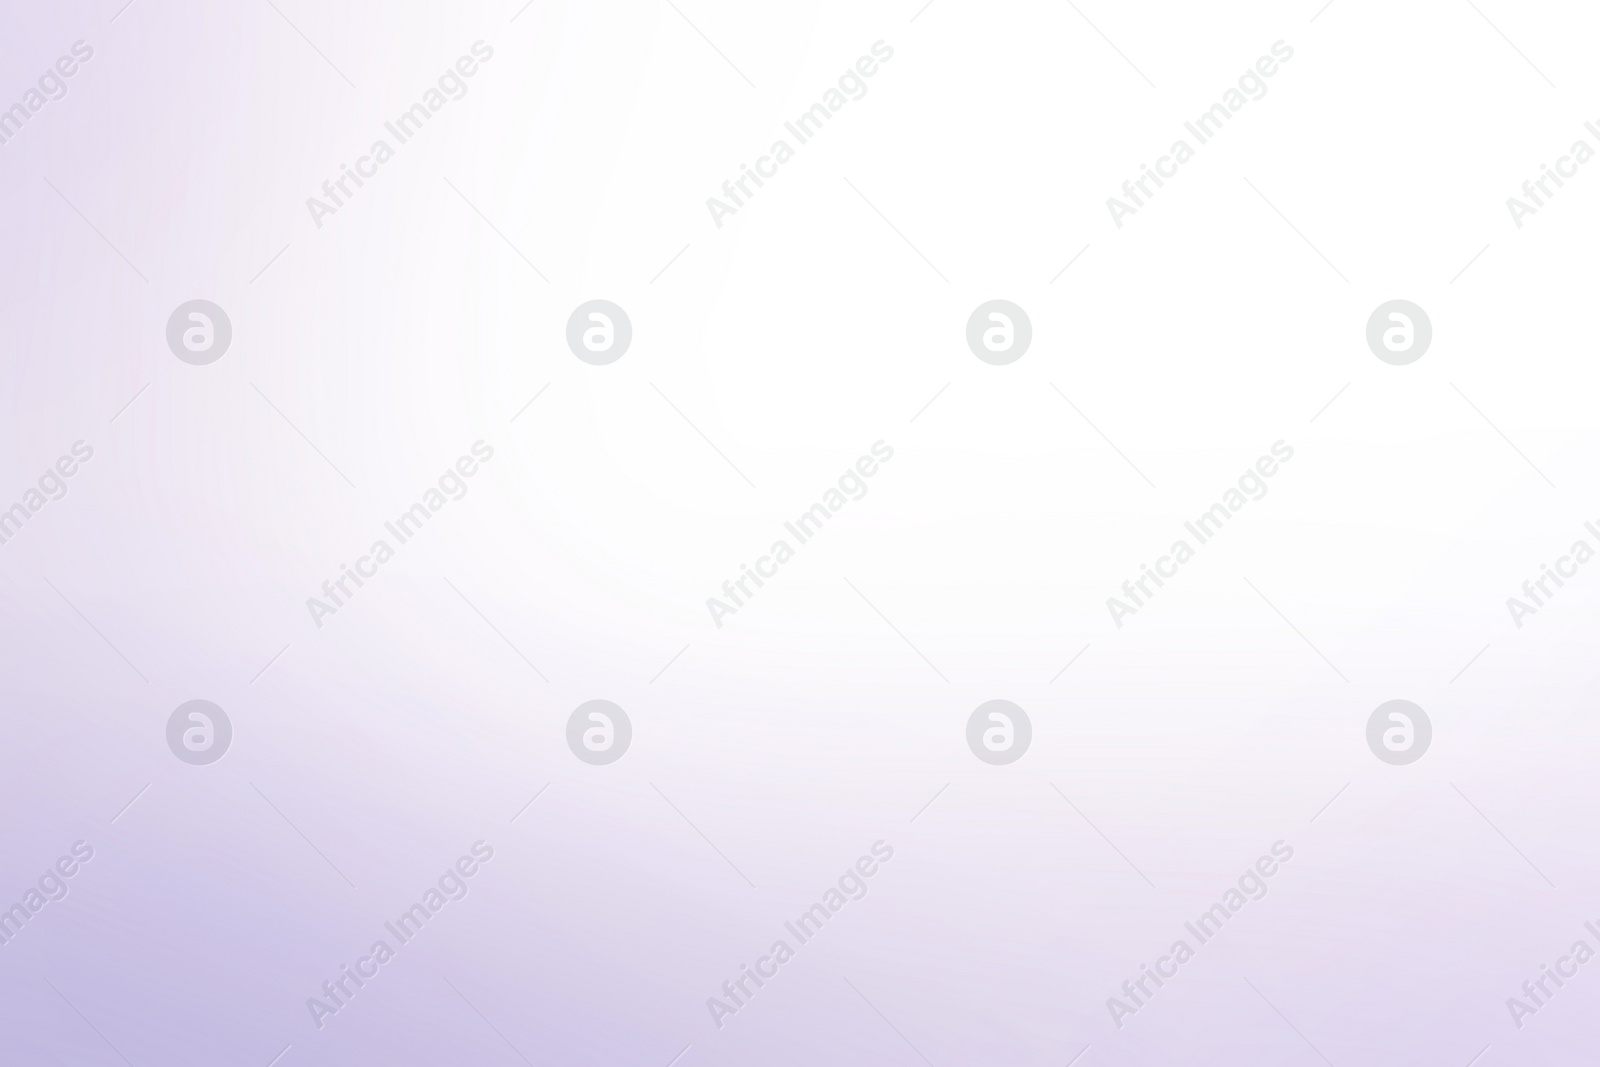 Image of From light orchid to white gradient background